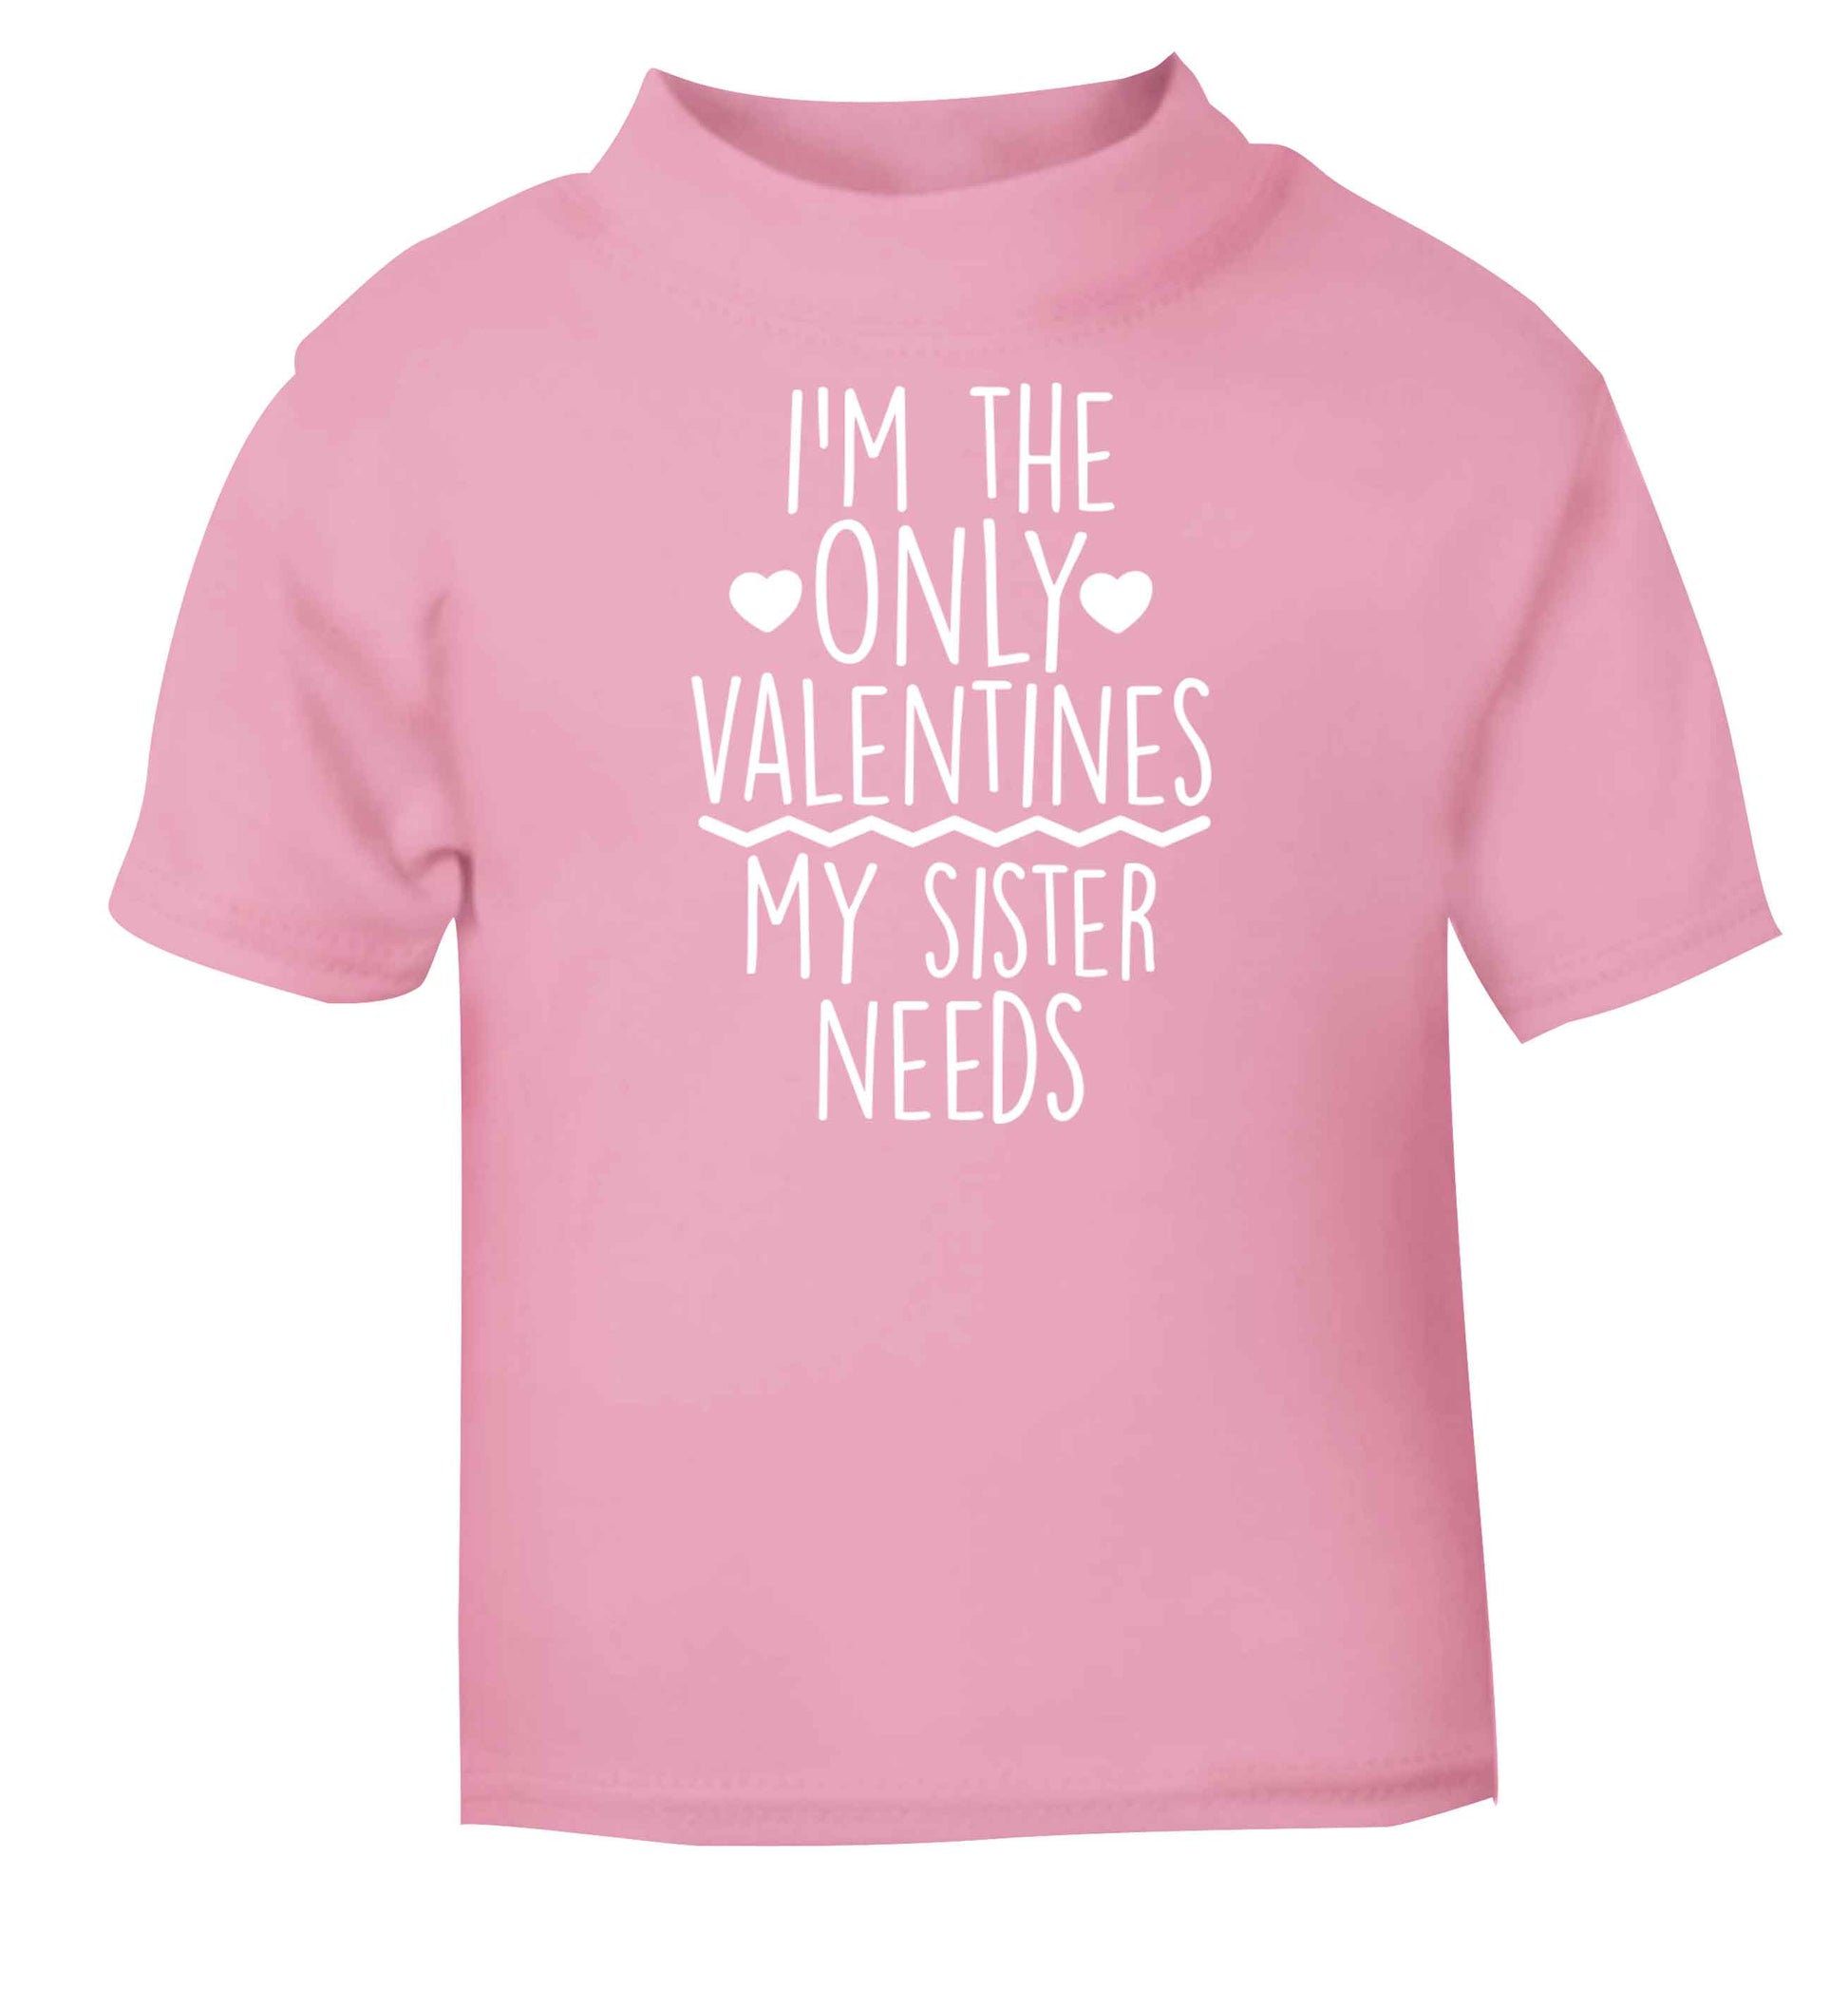 I'm the only valentines my sister needs light pink baby toddler Tshirt 2 Years